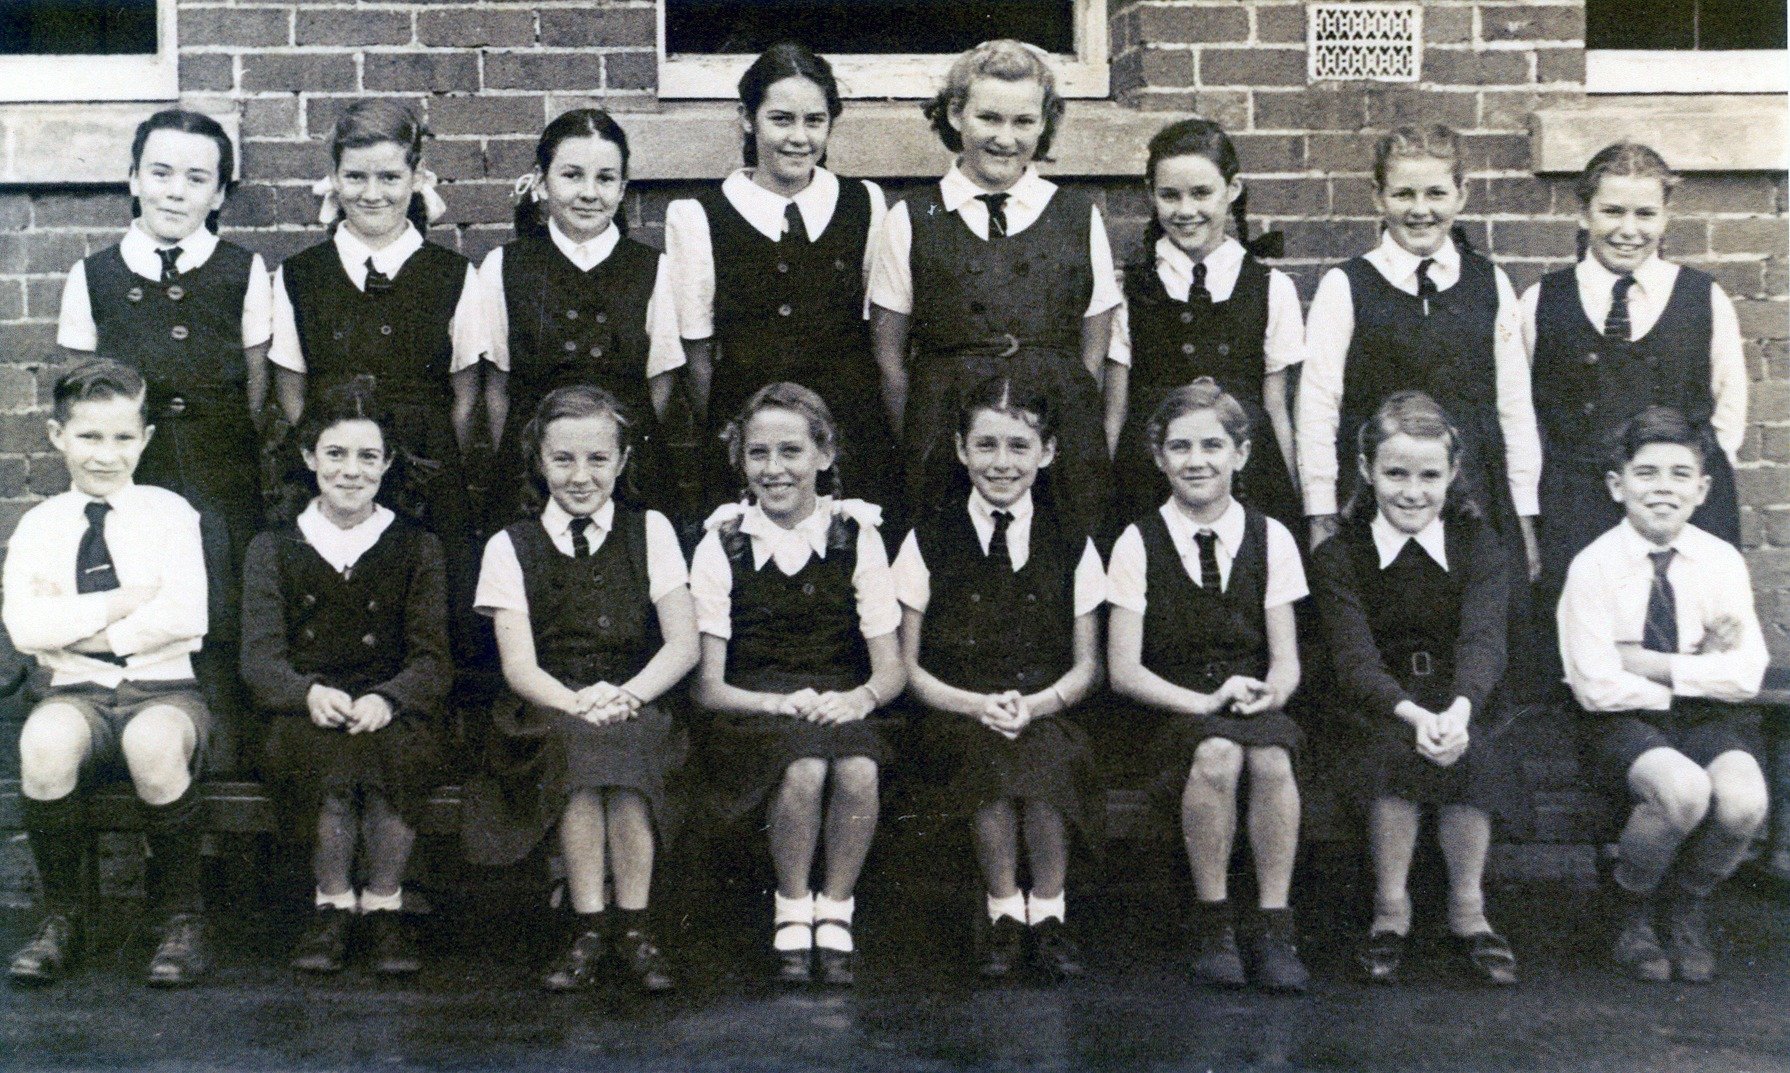  1951 - Grade 6 Back L-R: Marcia Dwyer, Marie Murphy, Mary Hayes, Margaret Dwyer, Desma McMahon, Gabriel Keating, Dorothea Hickey, Margaret Vance. Front: Barry Hayes, Mary McCabe, Annette Clark, Mary Stapleton, Margaret Quill, Barbara Alford, Pattie 